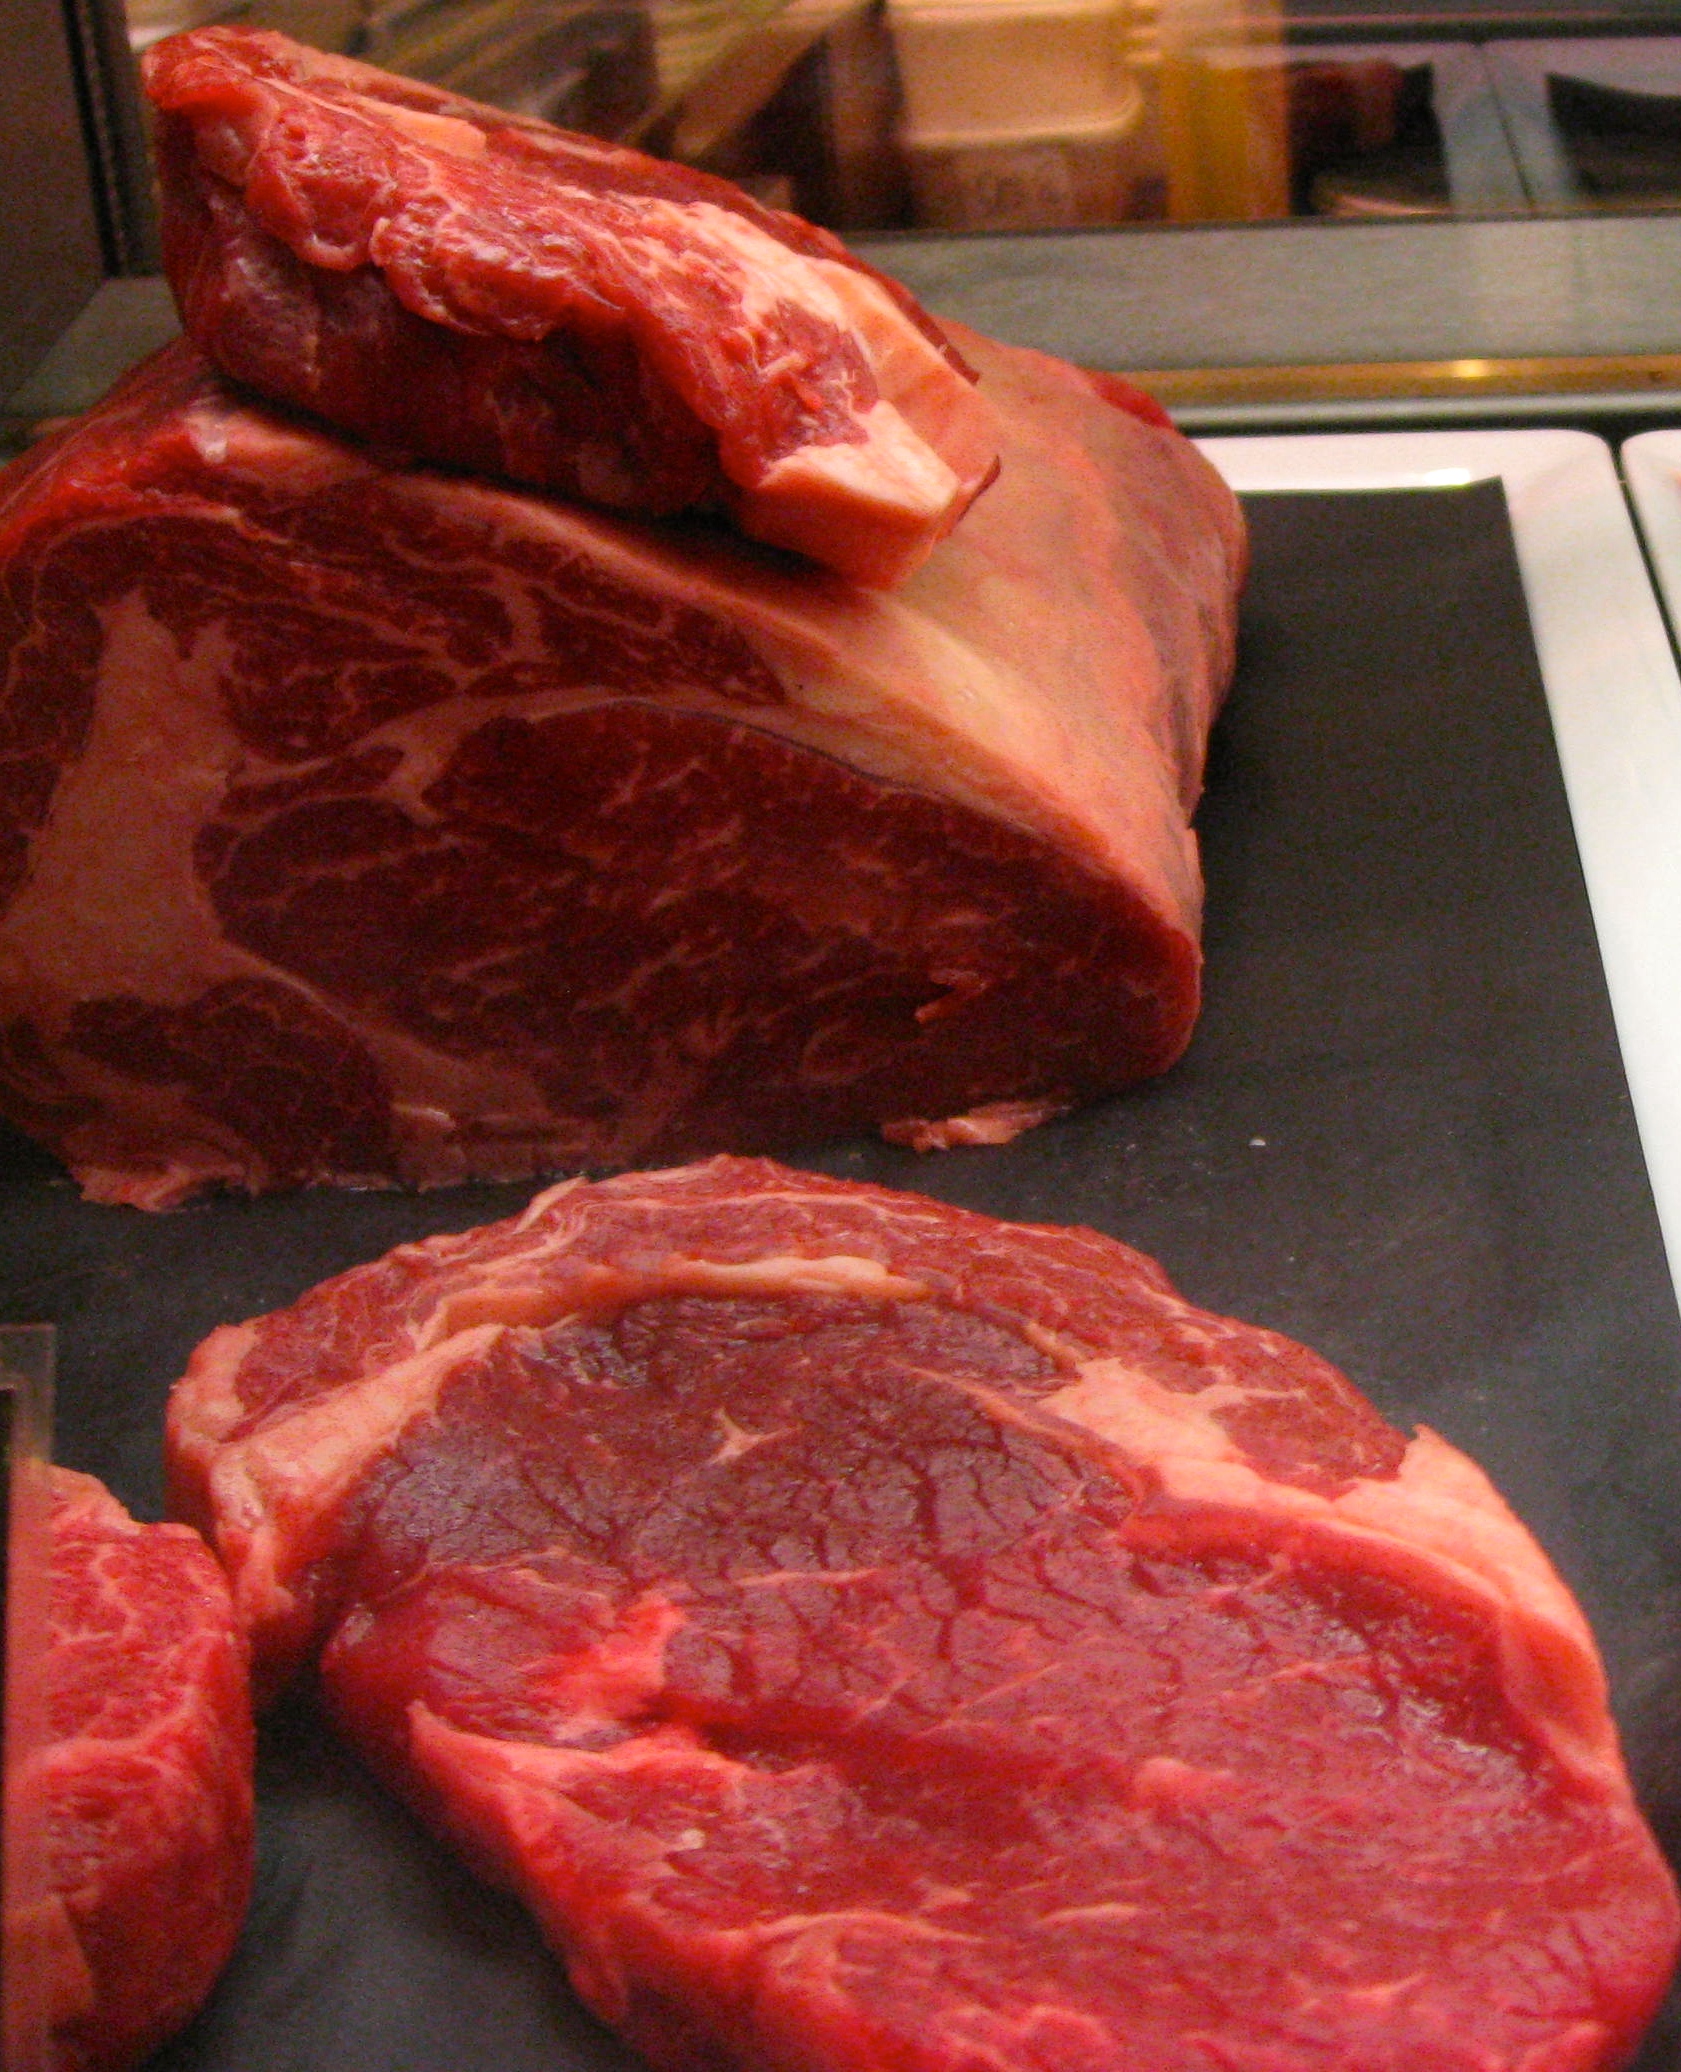 6 Ways To Recognize Top-Quality Beef at the Grocery Store, According to  Experts — Eat This Not That